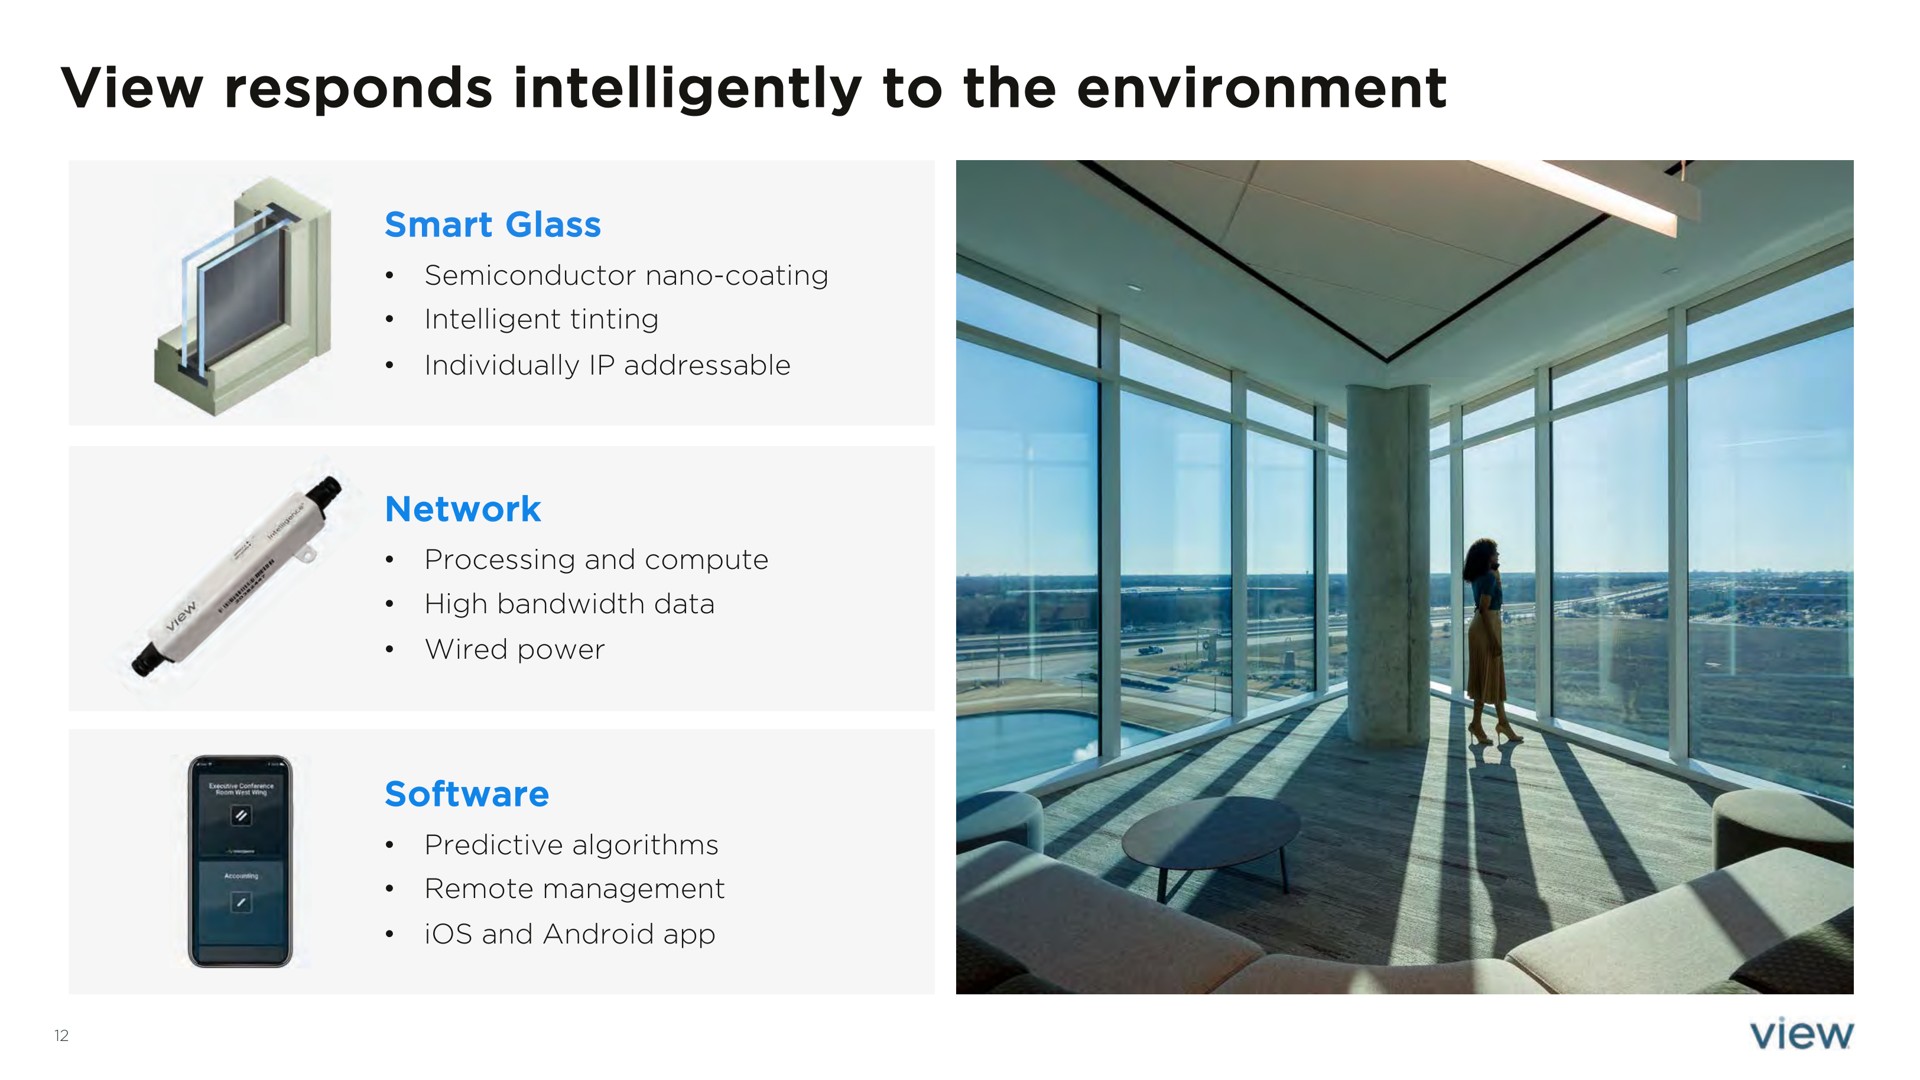 view responds intelligently to the environment | View